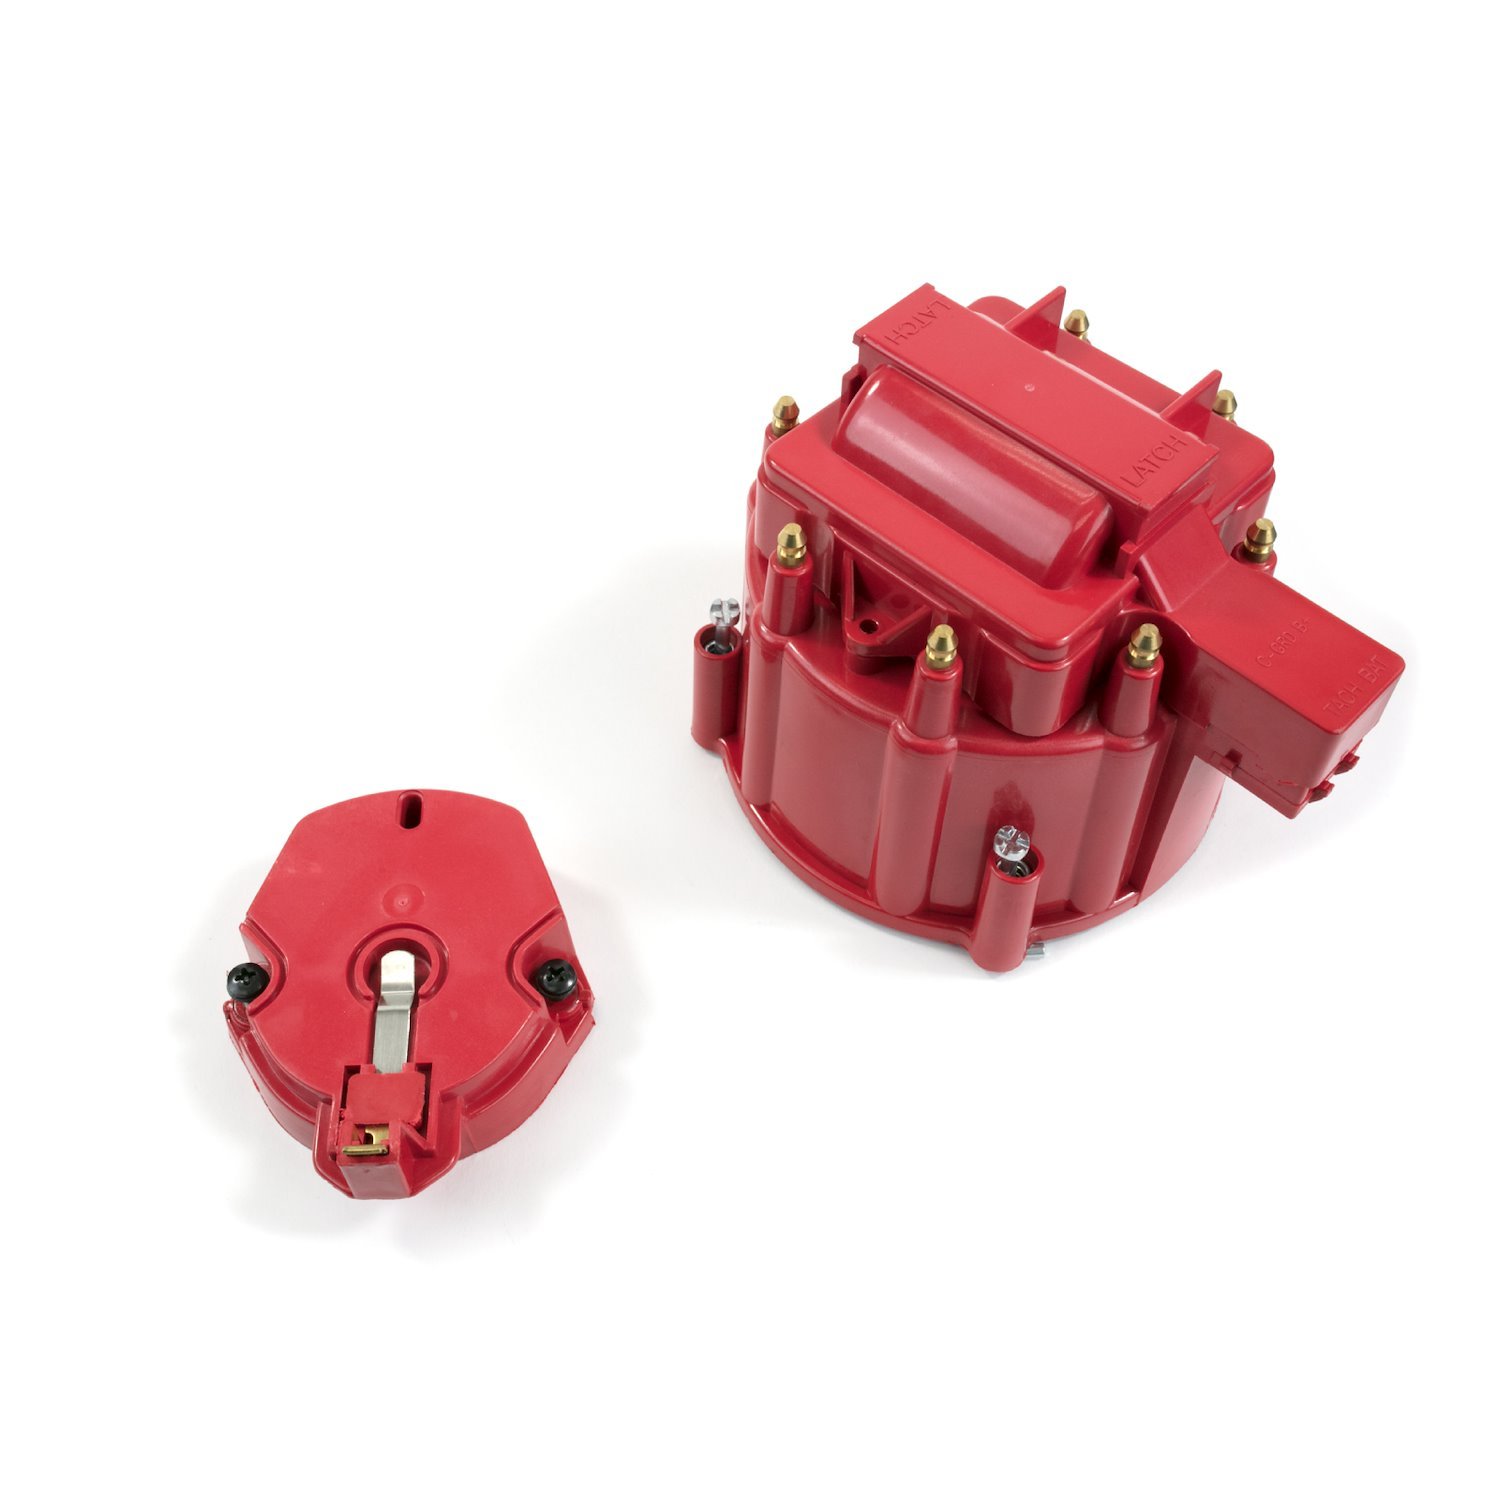 JM6951R HEI Distributor Standard Cap and Rotor Kit, 8 Cylinder Male, Red